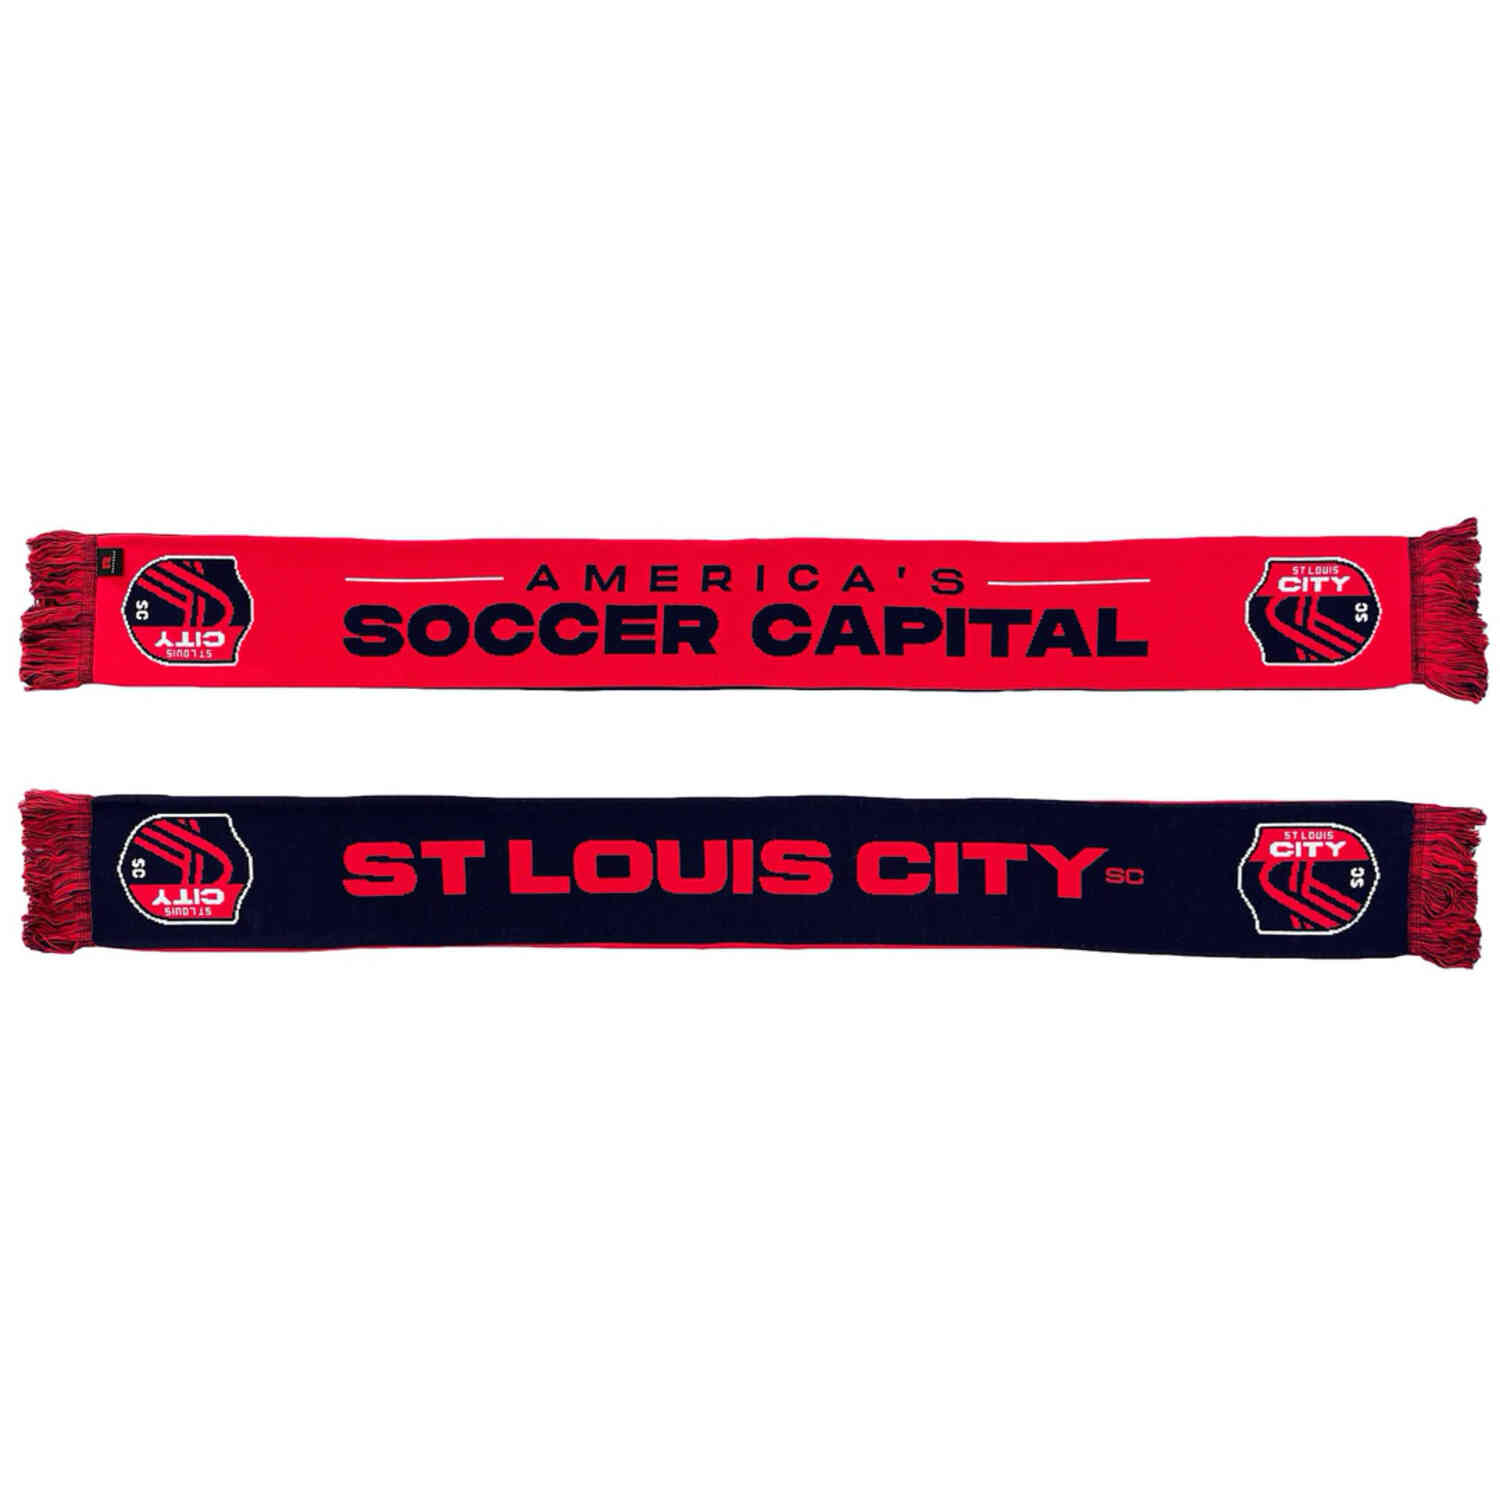 2021 St. Louligans Scarf – Saint Louligans – Supporting Soccer in the St.  Louis Area